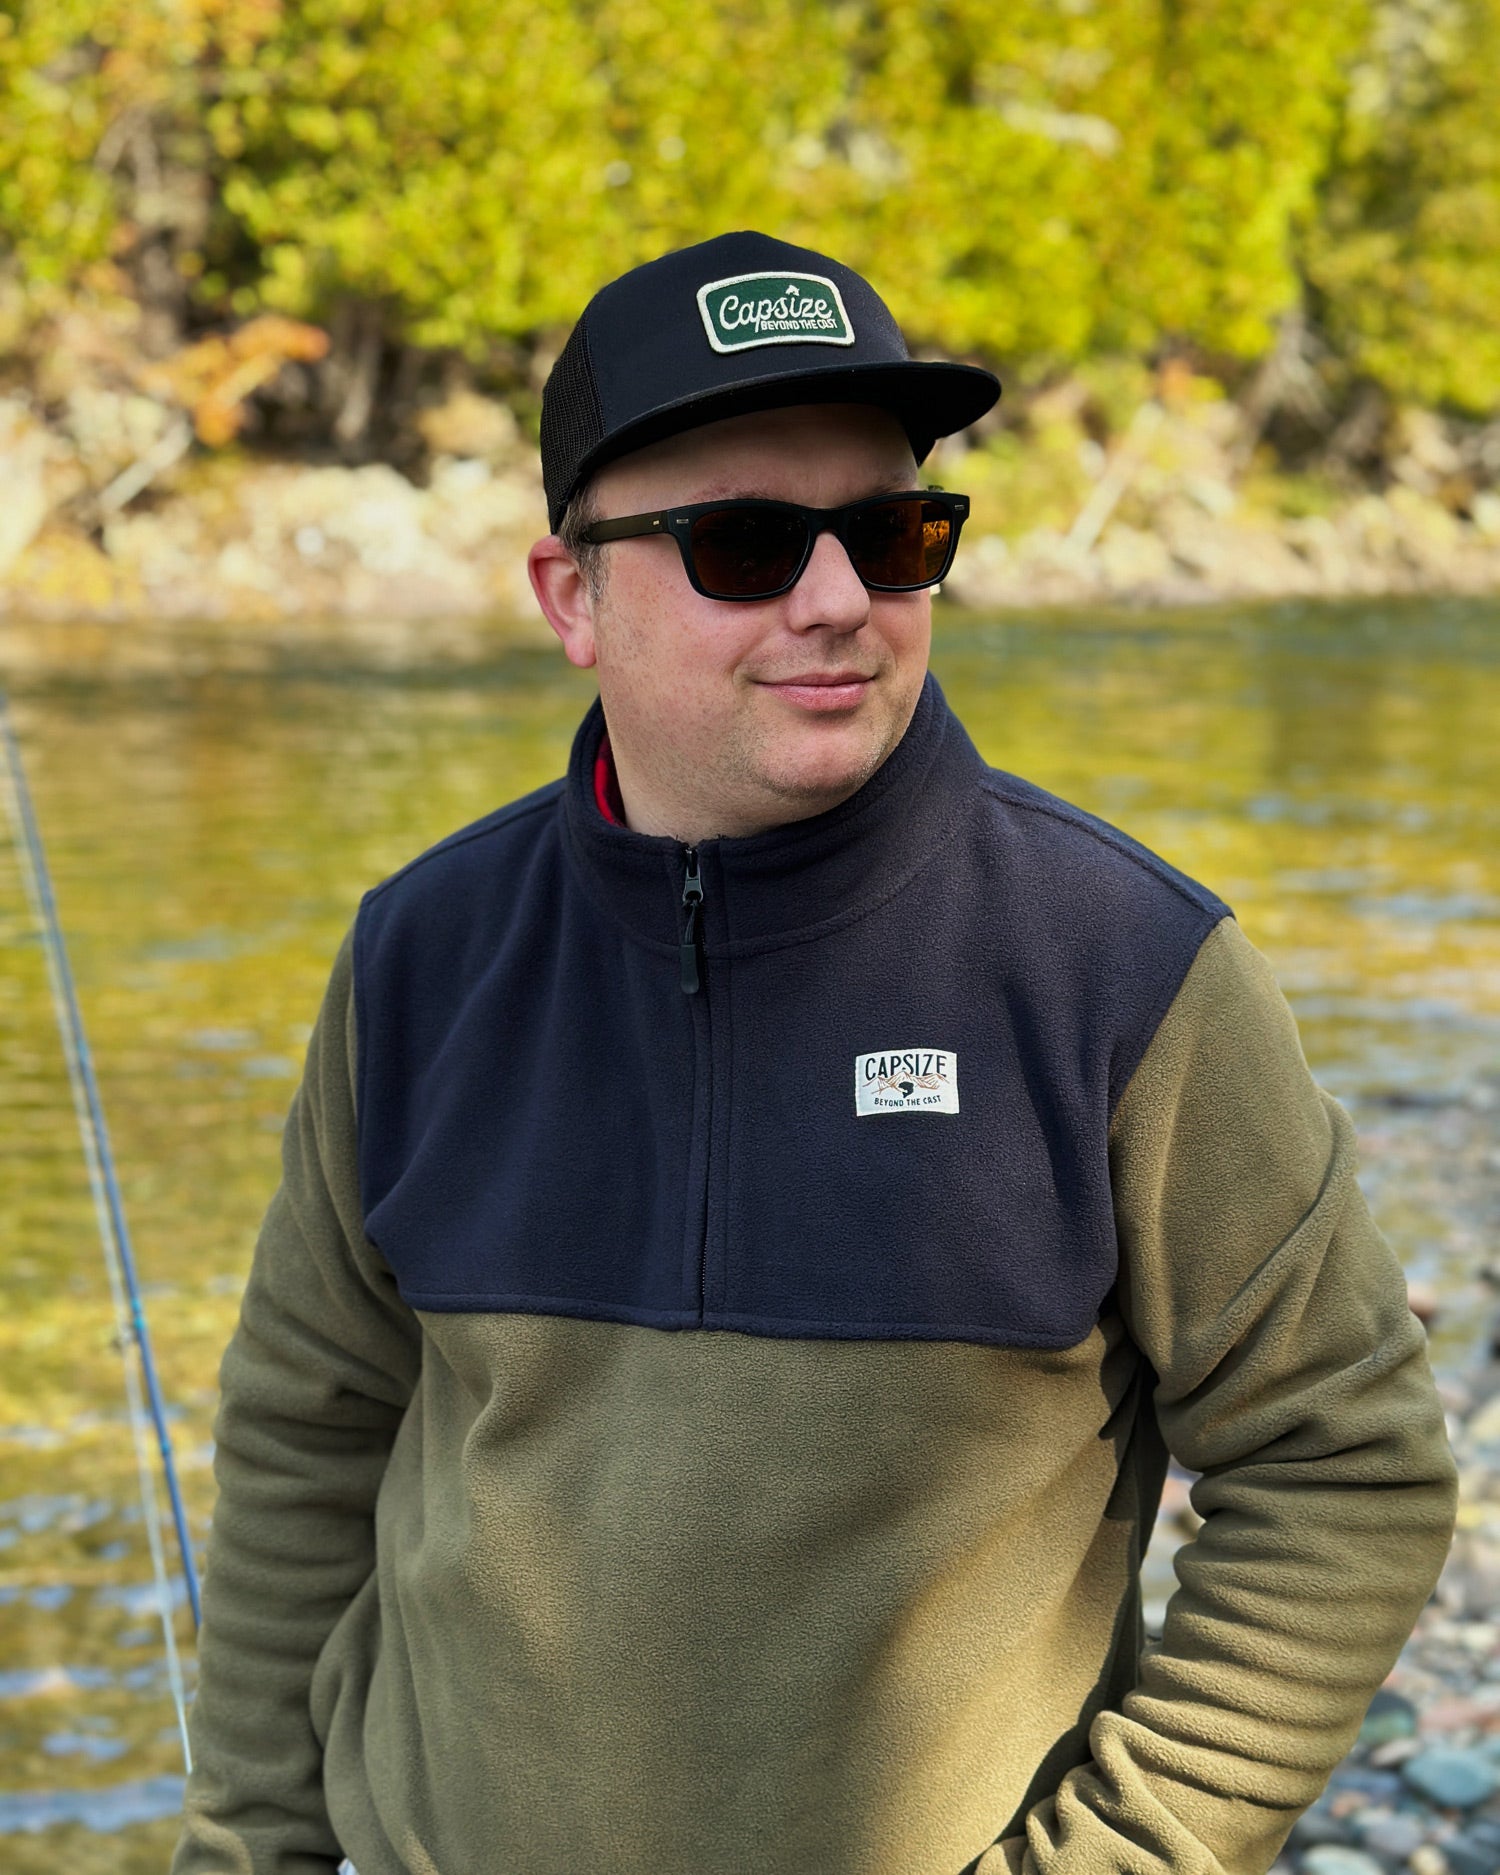 Salmon Patch Black Trucker Hat Capsize Fly Fishing -  Canada